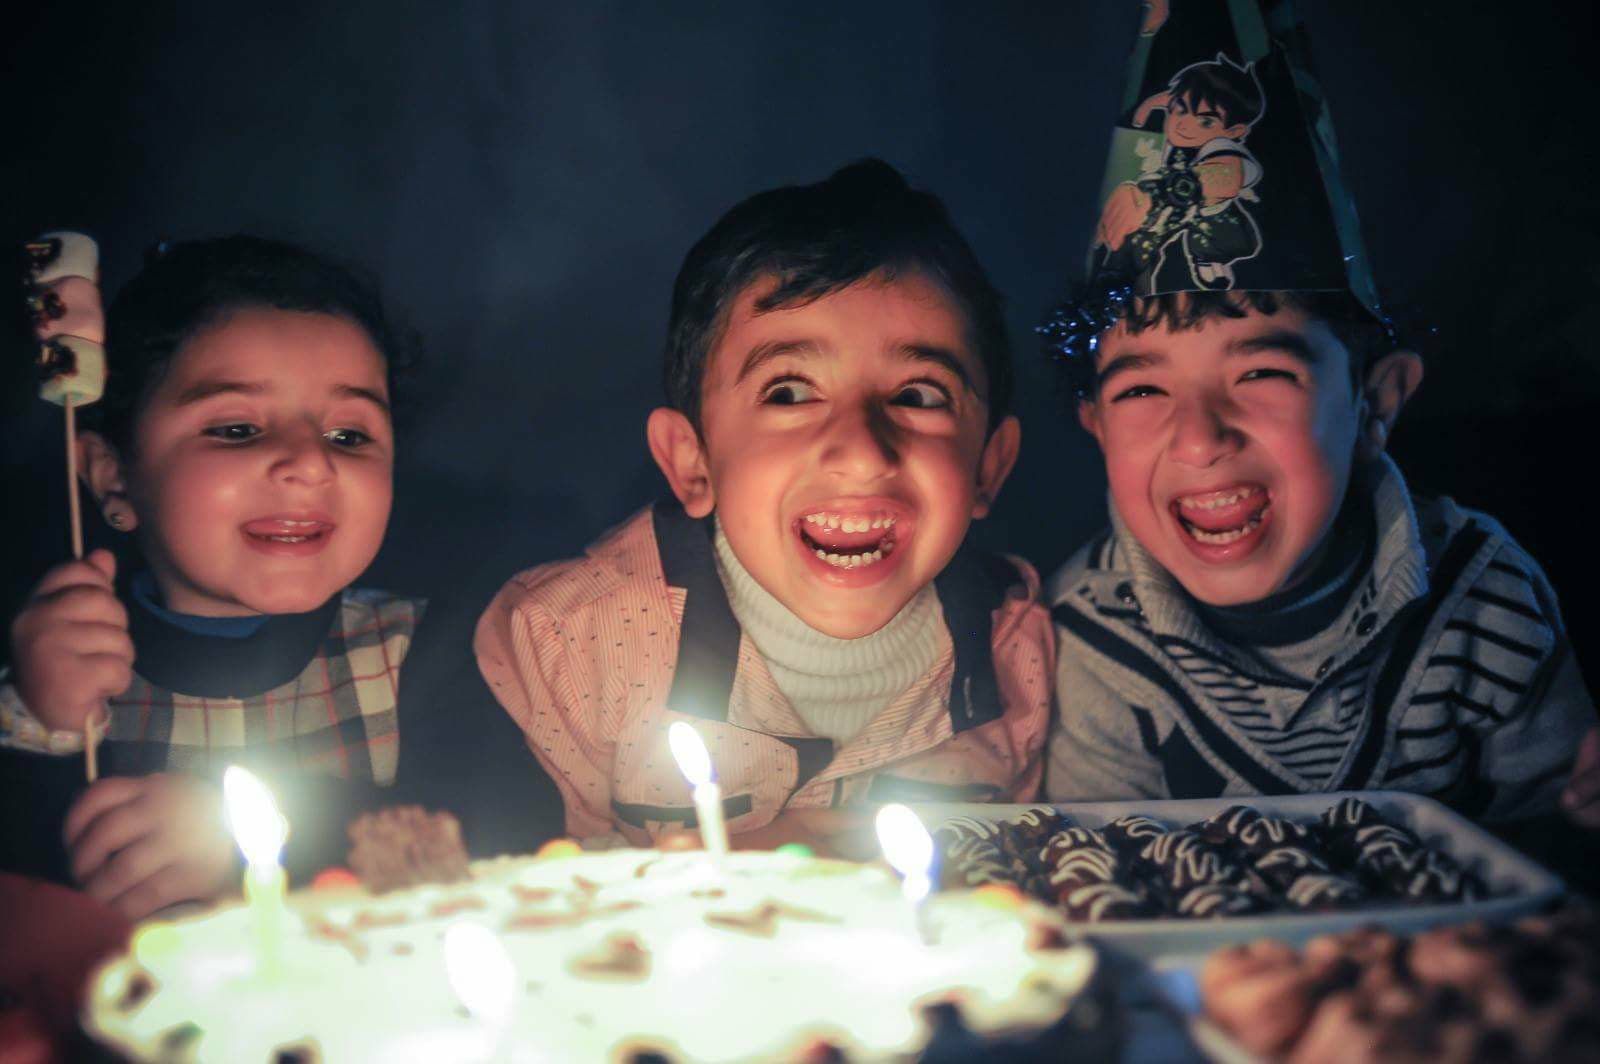 My nephew and two friends celebrate his birthday with no electricity